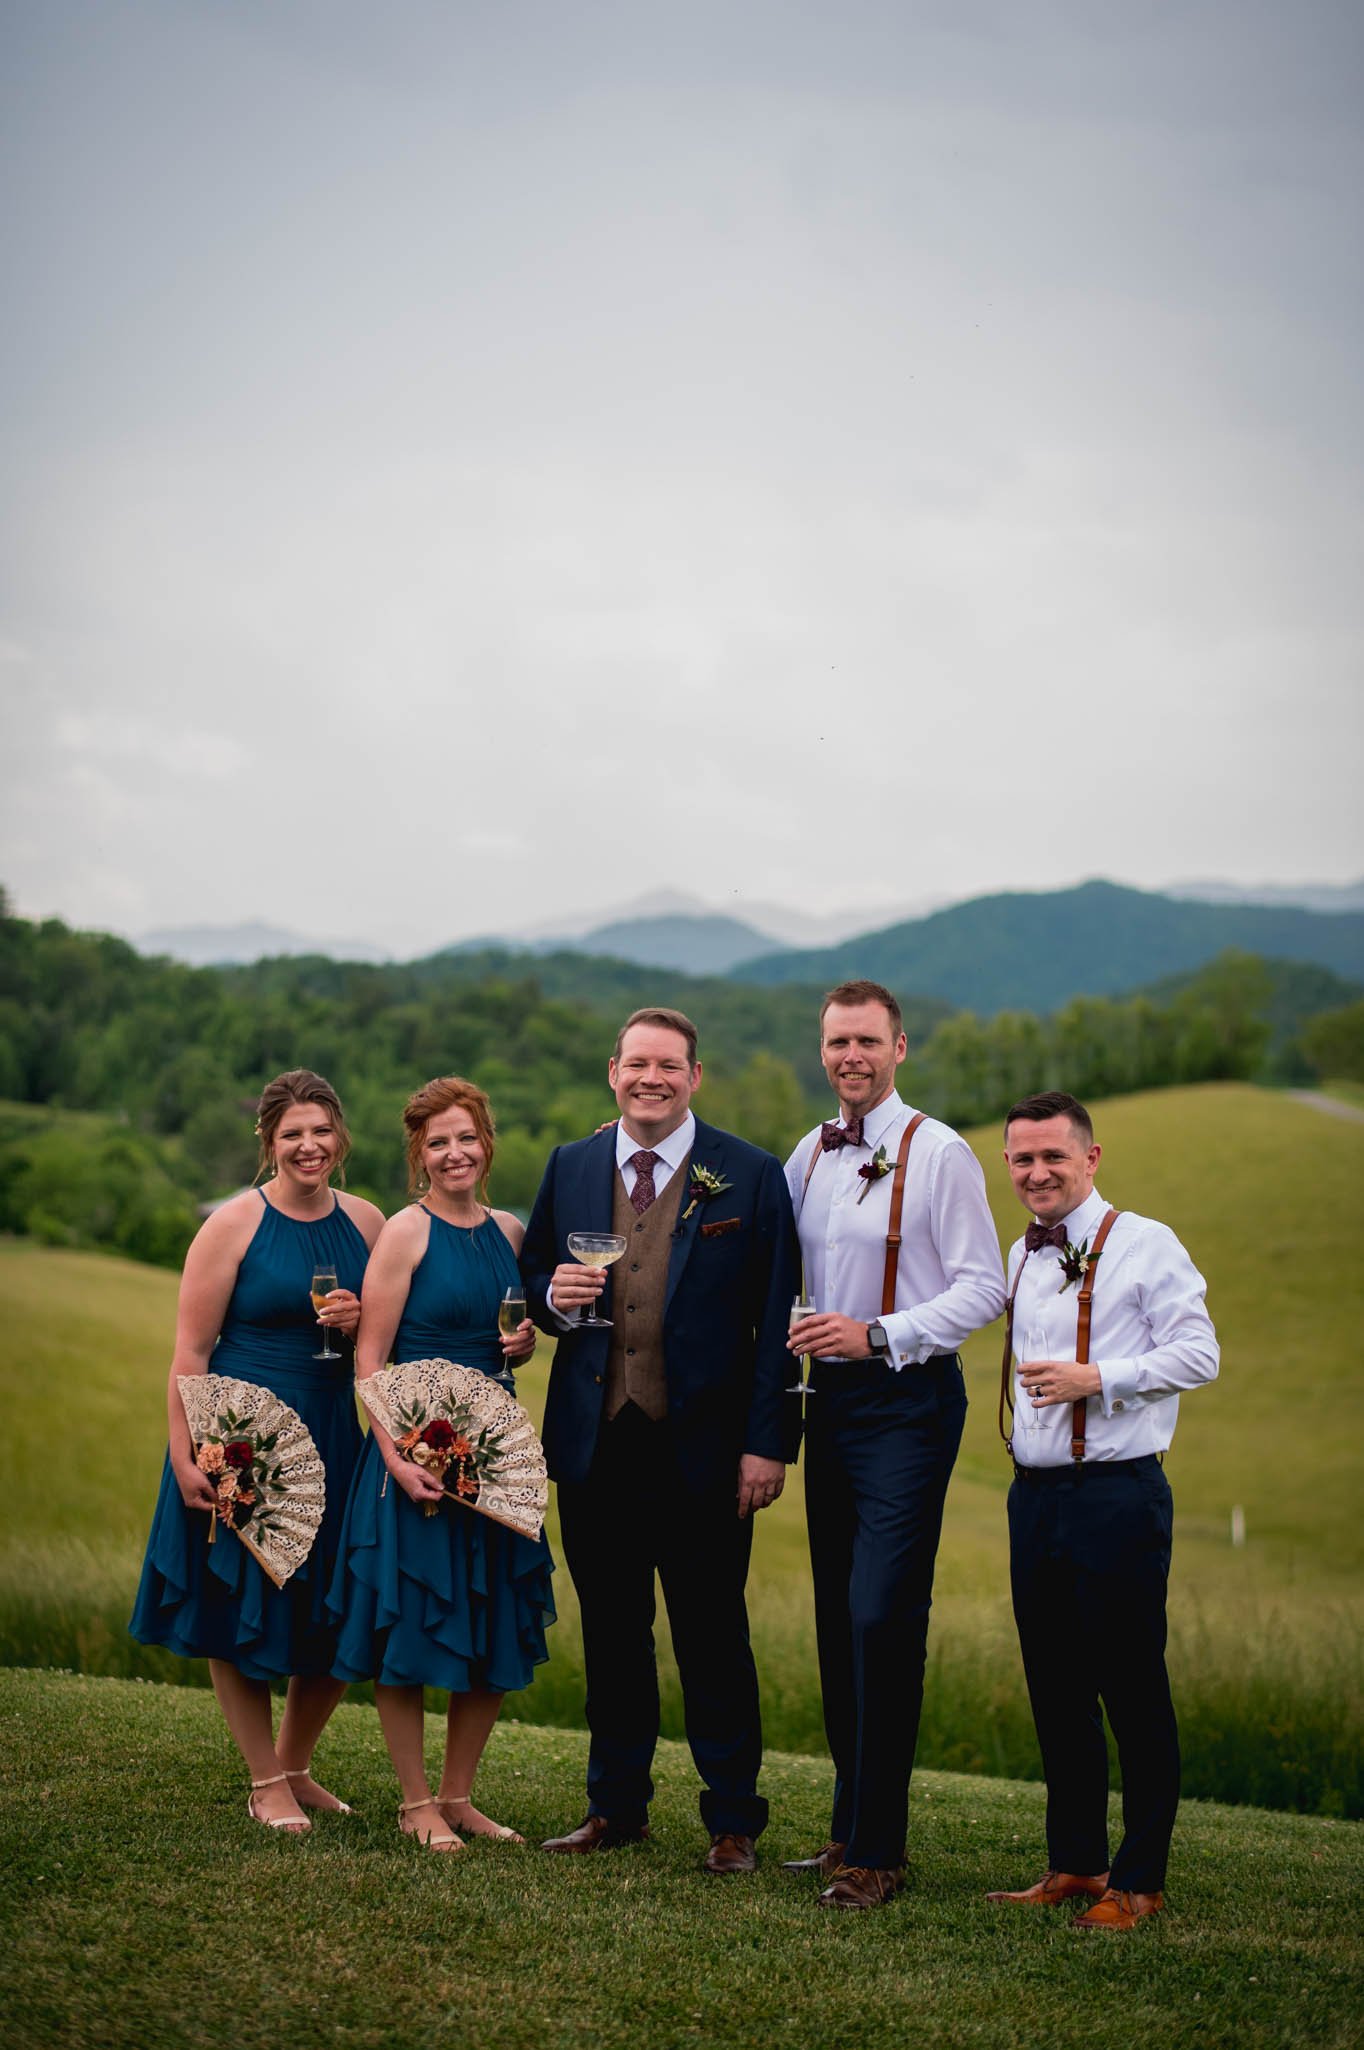 The Ridge – Weddings and Events Venue in Asheville